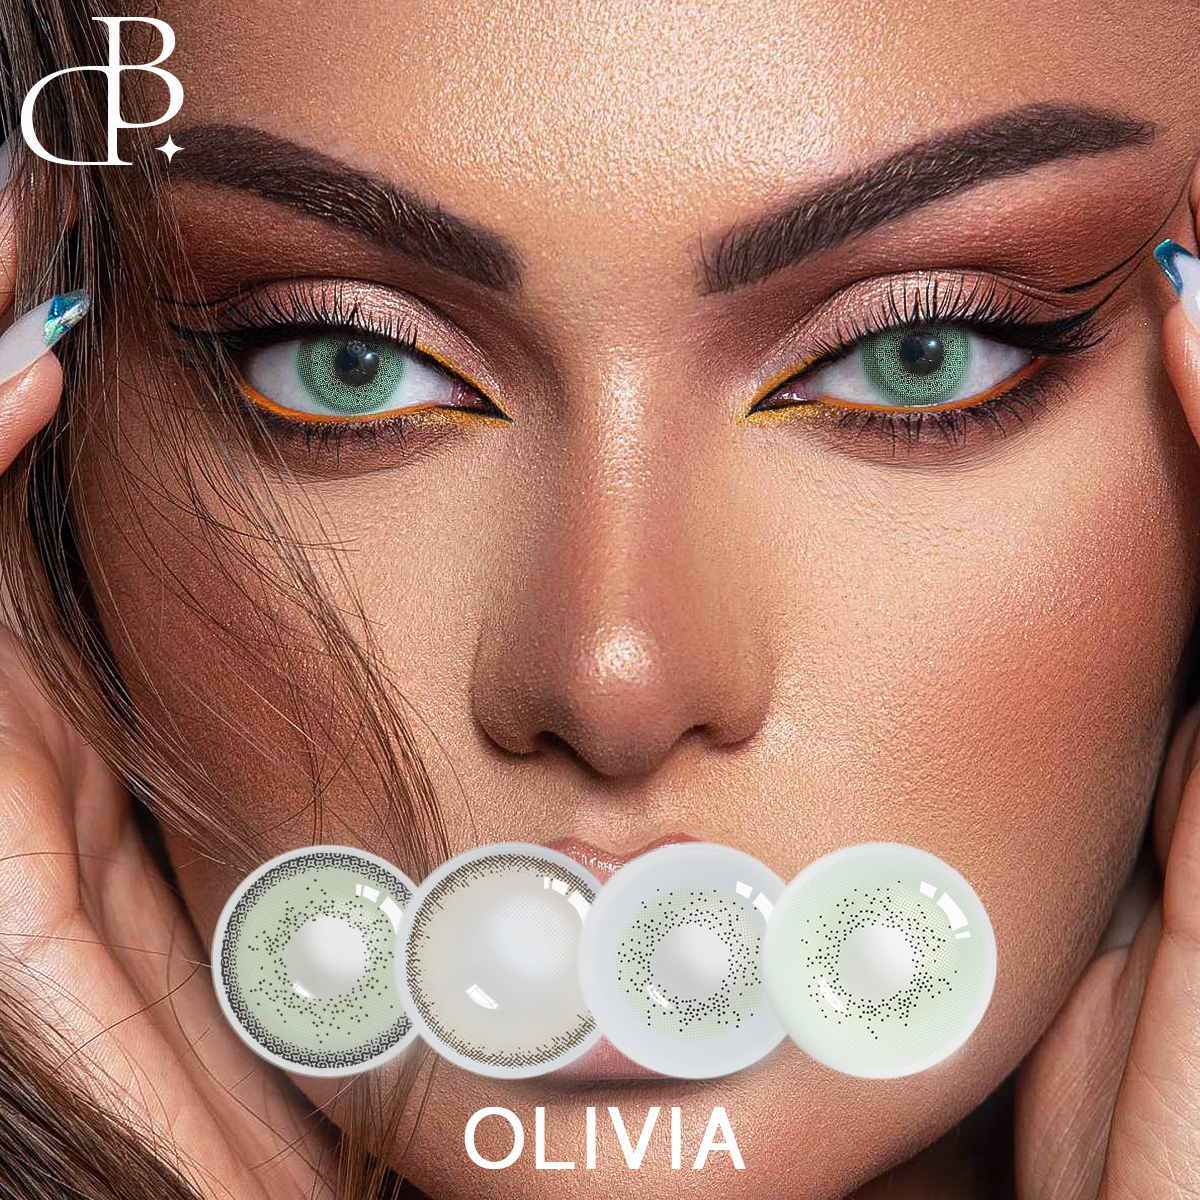 OLIVIA Hot sale Colored Eye Contact Lens oem Contacto de color 14.20mm 14.50mm Color Contact Lens